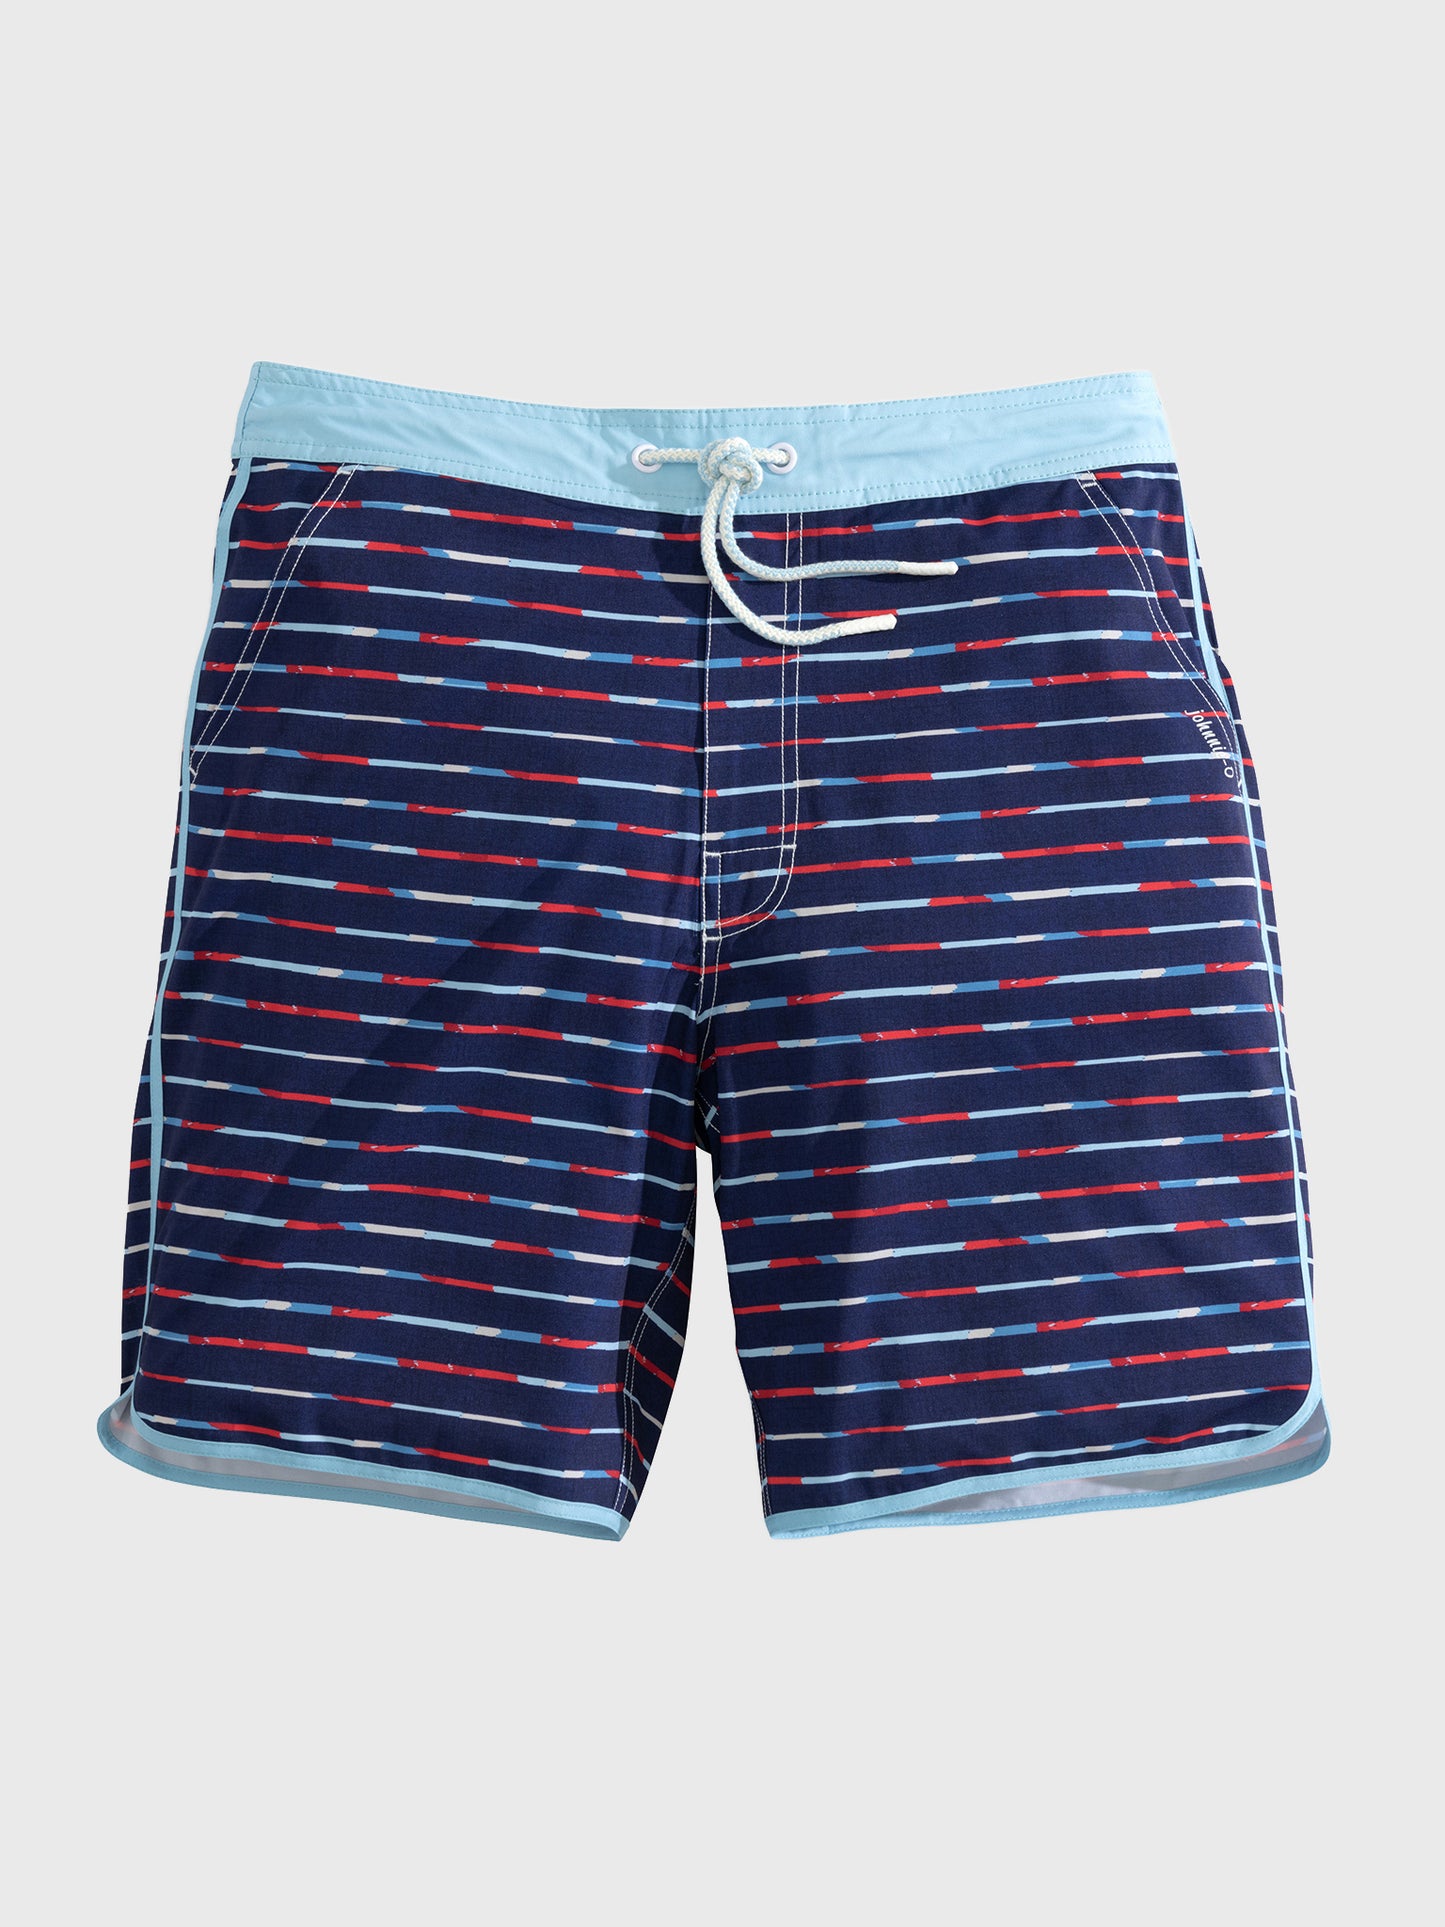 Johnnie-O Boys' Claireview Board Short